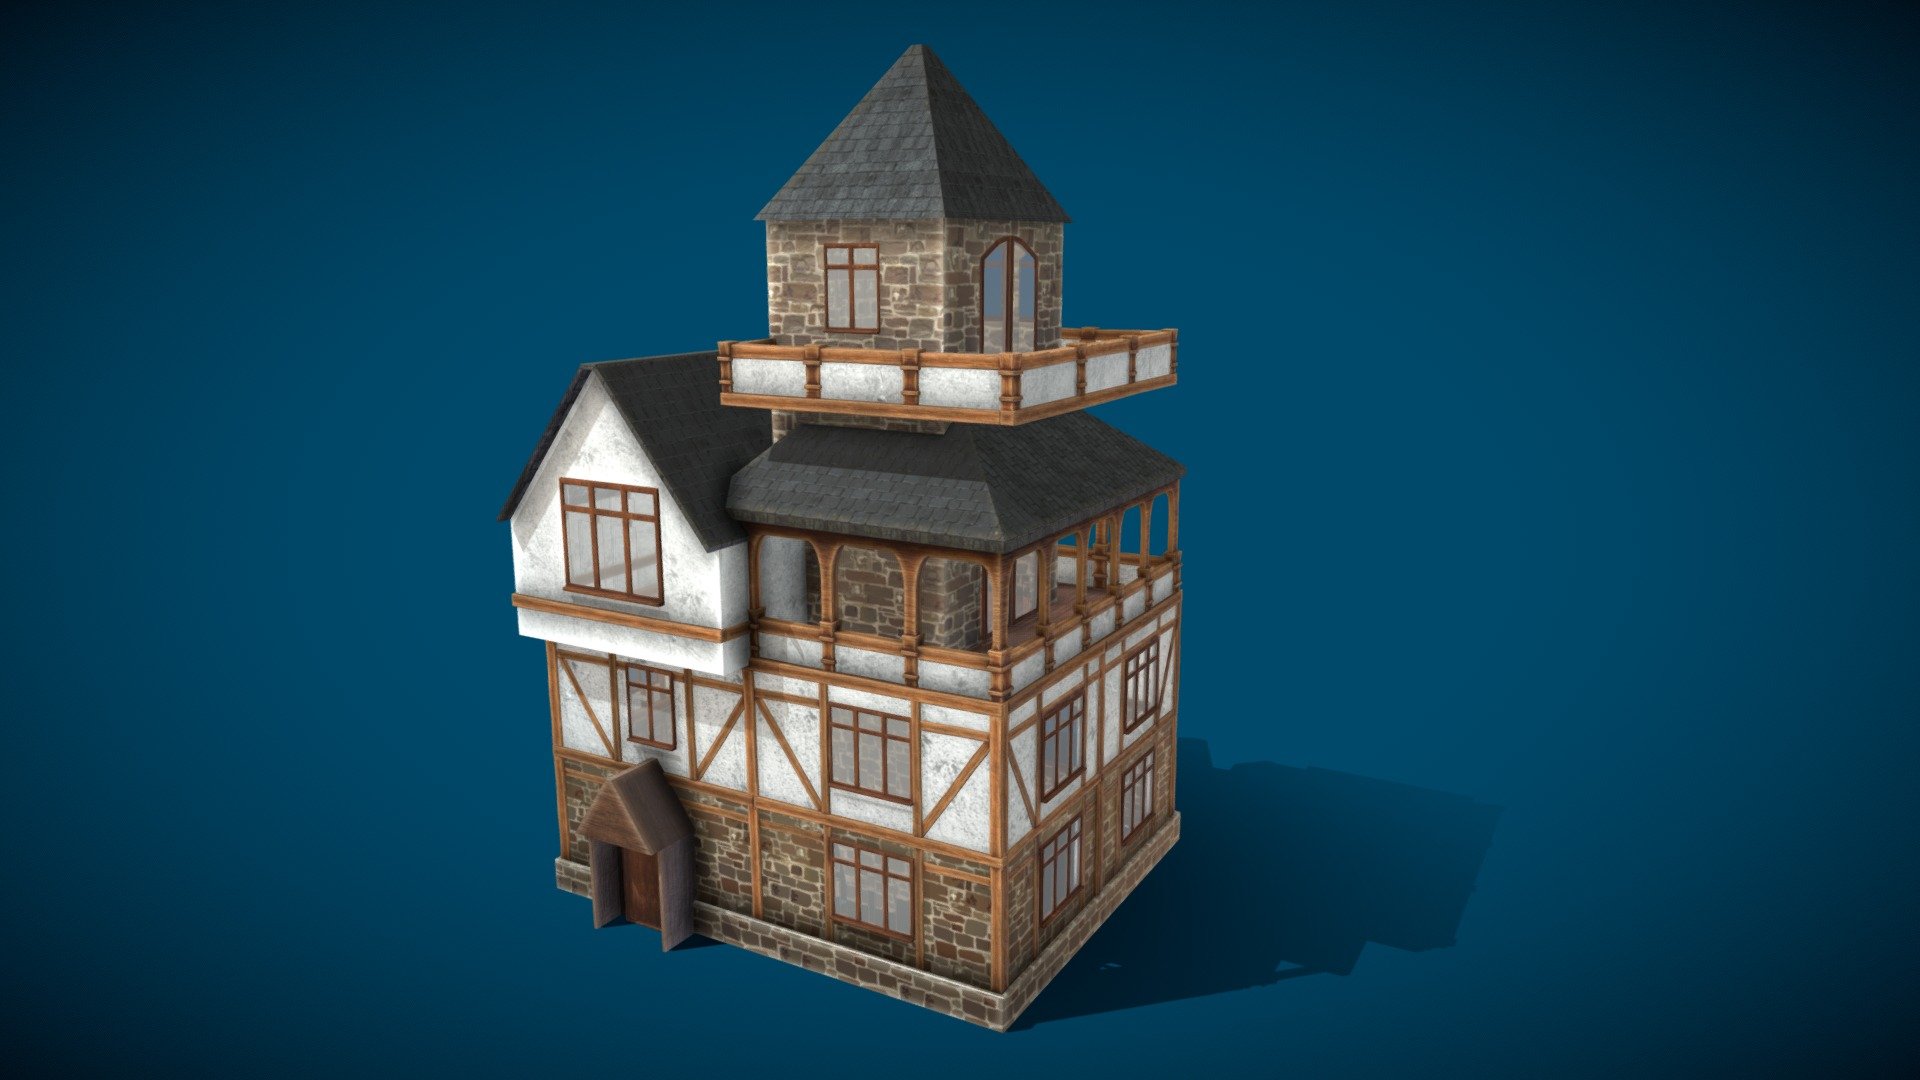 A low poly style Tudor house that I modelled in Blender and textured in Substance painter. This was a small personal project that was part of my learning process for modeling and texturing. 

Please note that this model has no interior modeling or walls, and there are 4 different material slots that include the wooden frame, walls, roof and windows. It works best as a background building, but with some updates it would work with close up views.

I love the tudor building style, wooden frames and just general look of tudor architecture and if you use this model I hope if fits well into your scene.

If I were to make this now I would use a different approach as some of the elements are not quite as oppitismed as they could be, but that is all part of the learning. For example I would now build the walls as modular sections and these sections would include the wooden frame which would make for a more efficient use of UV mapping and texturing. Although I'm still happy with the result and hence I am sharing here 3d model